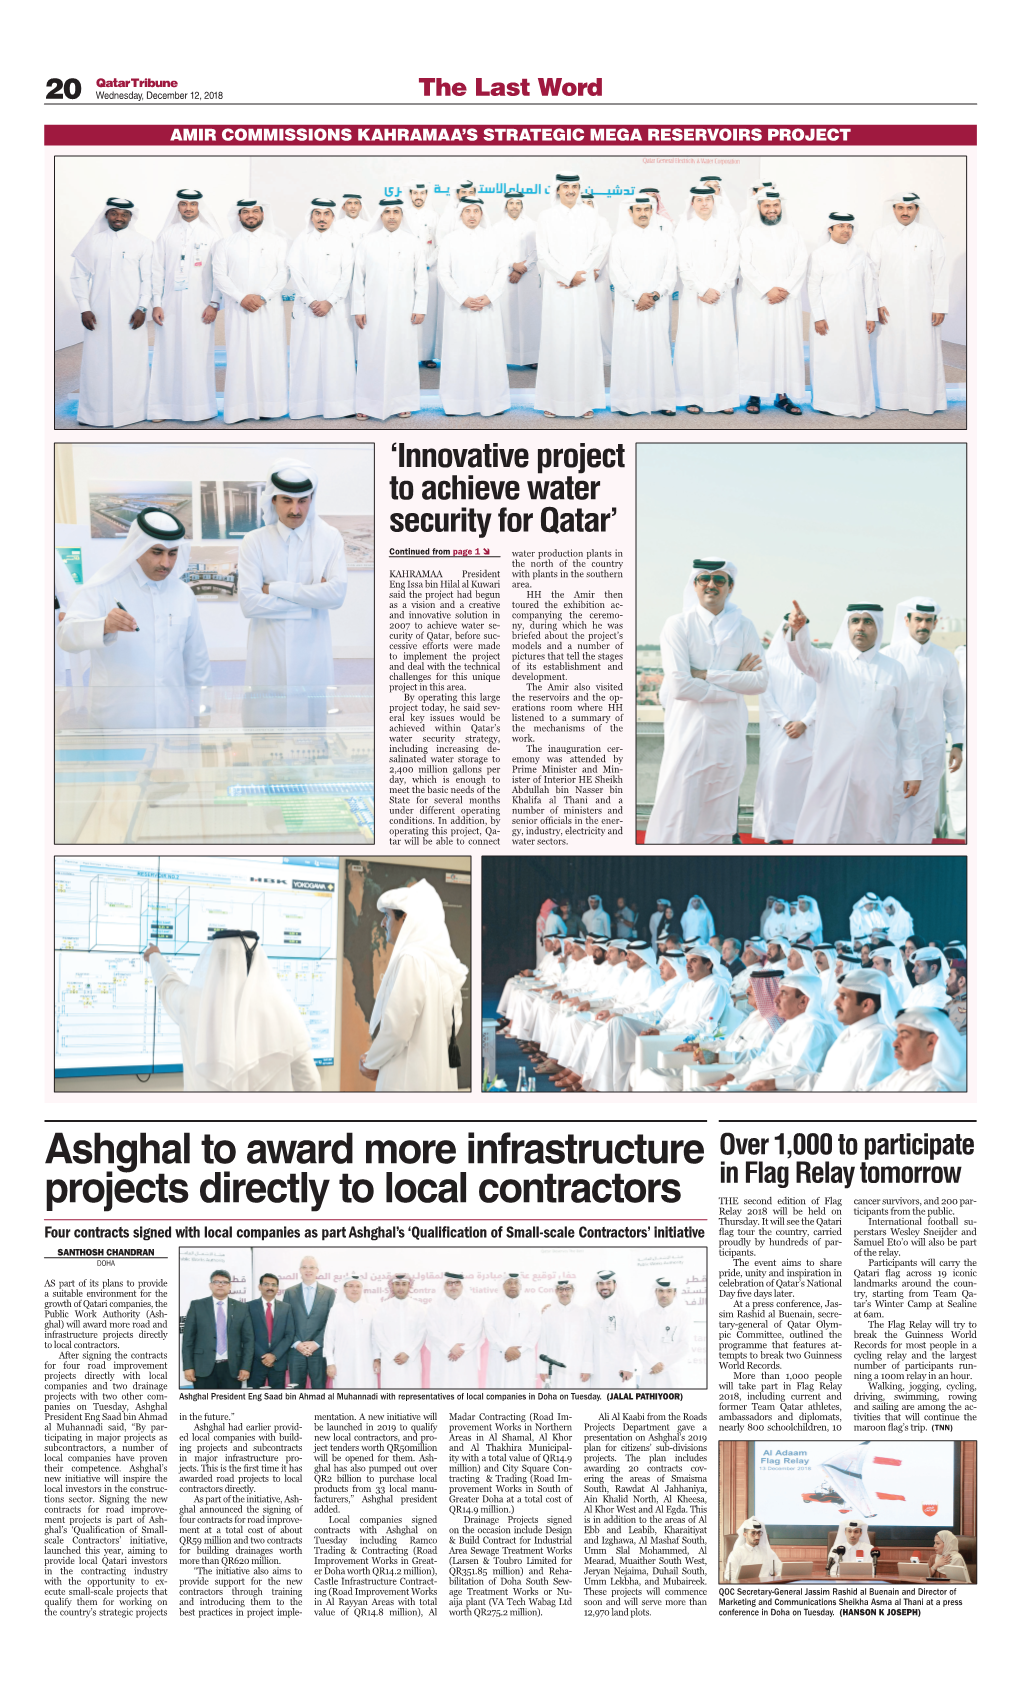 Ashghal to Award More Infrastructure Projects Directly to Local Contractors